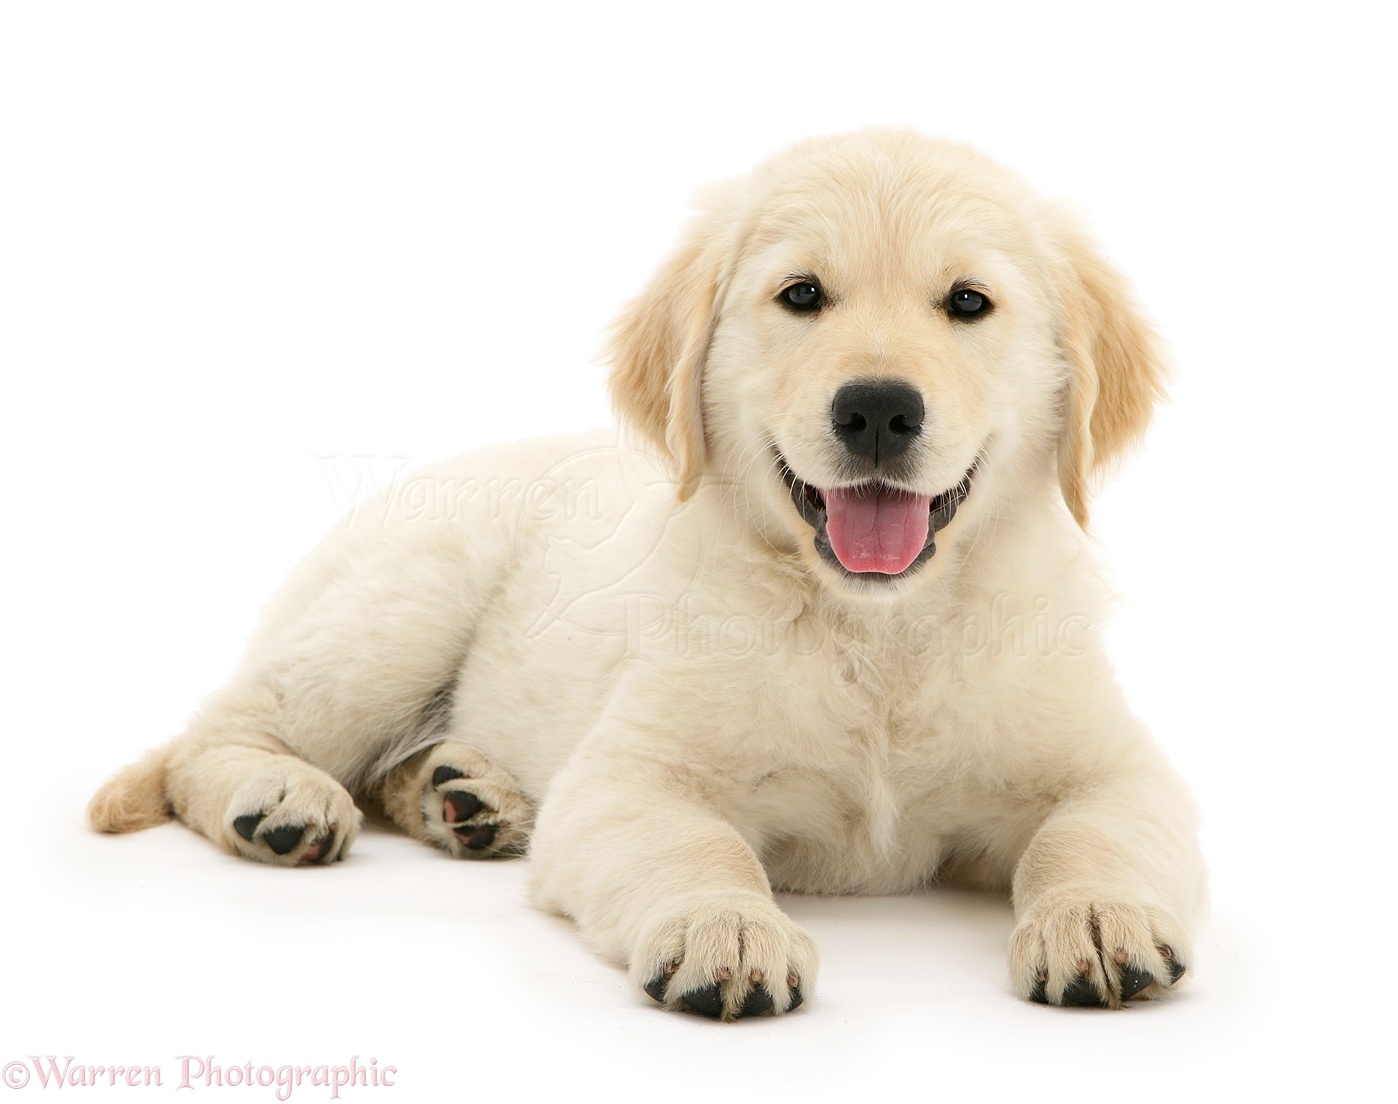 Dog Golden Retriever Pup Lying With Head Up Photo Wp30369